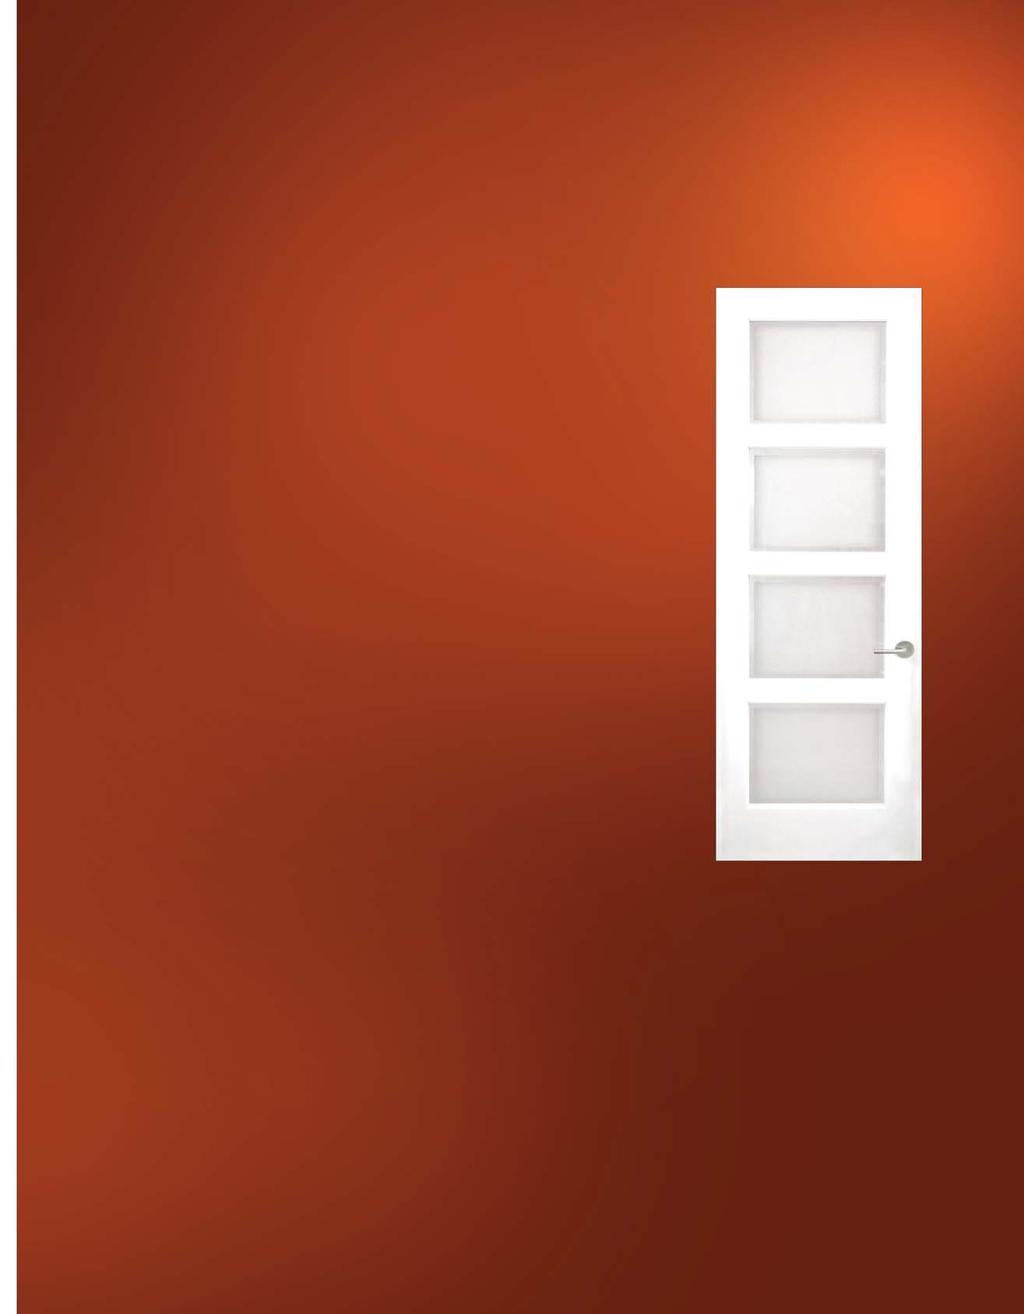 All doors are available in widths from 1 0 to 3 6 by 6 8, 7 0 and 8 0 tall. Thicknesses 1 3/8, 1 3/4 and 2 1/4. All panels can be replaced with glass.